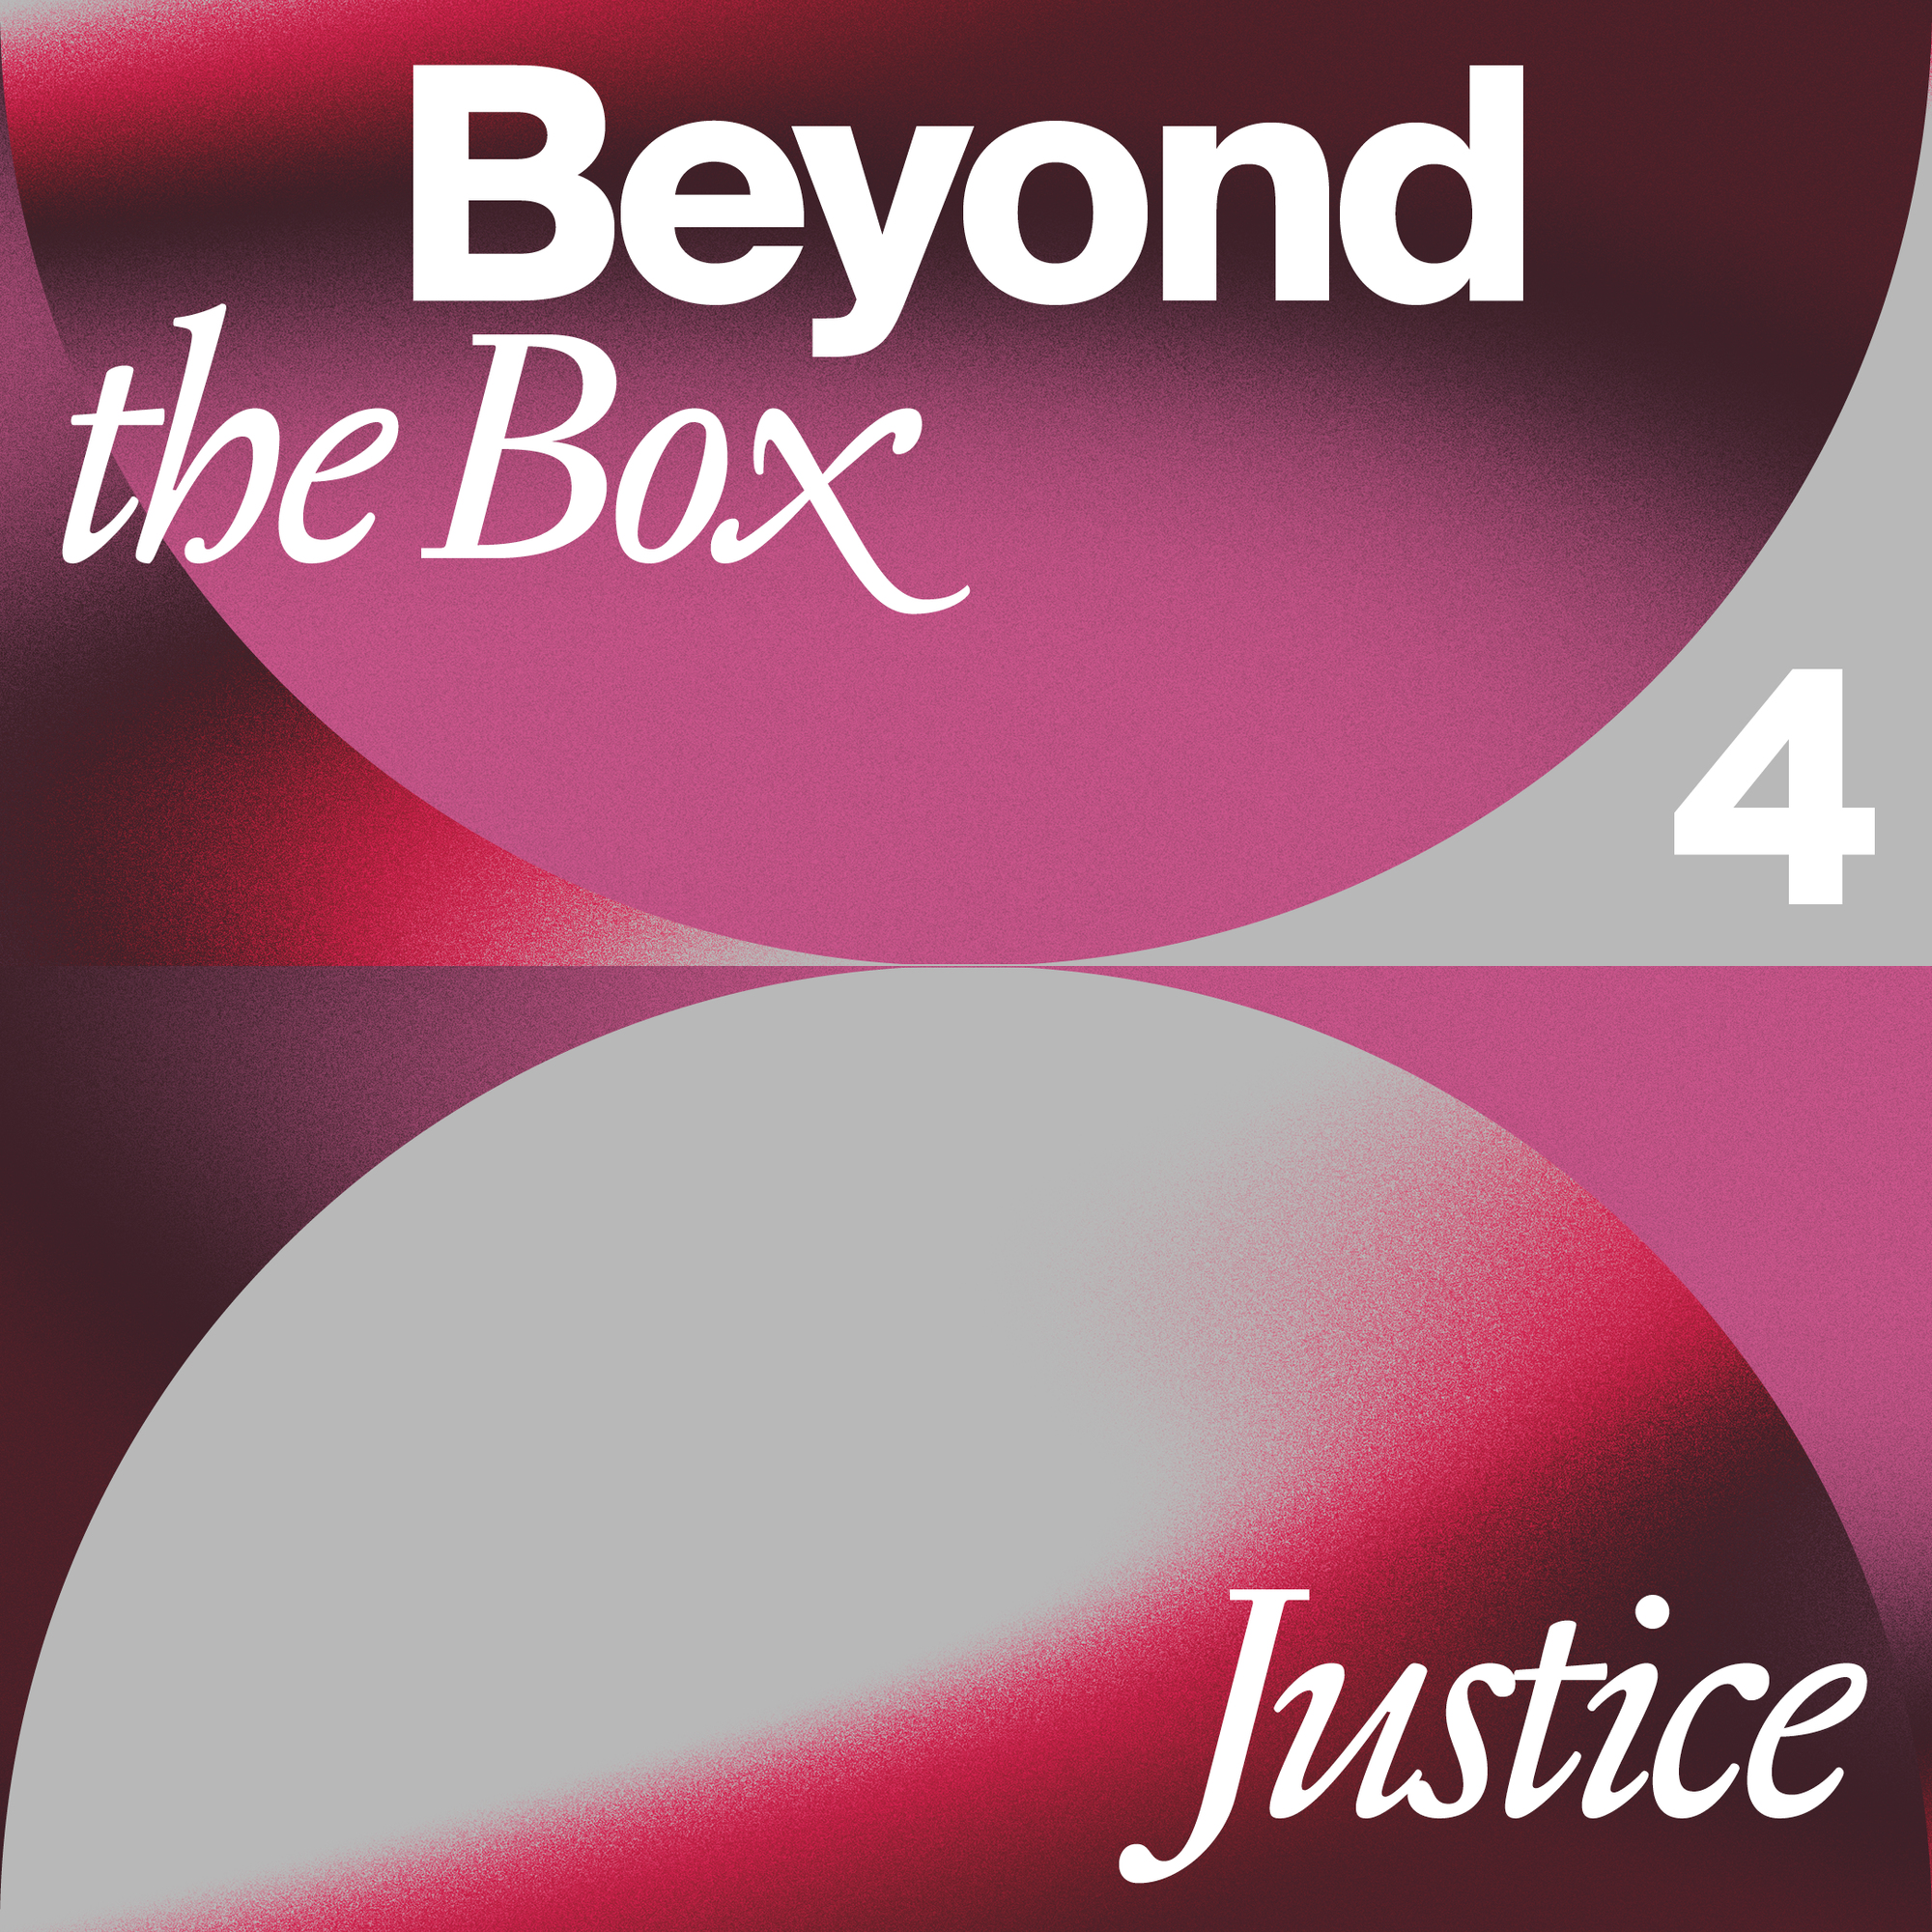 For Freedoms: Beyond The Box 4 (JUSTICE for Our Future) at Pioneer Works